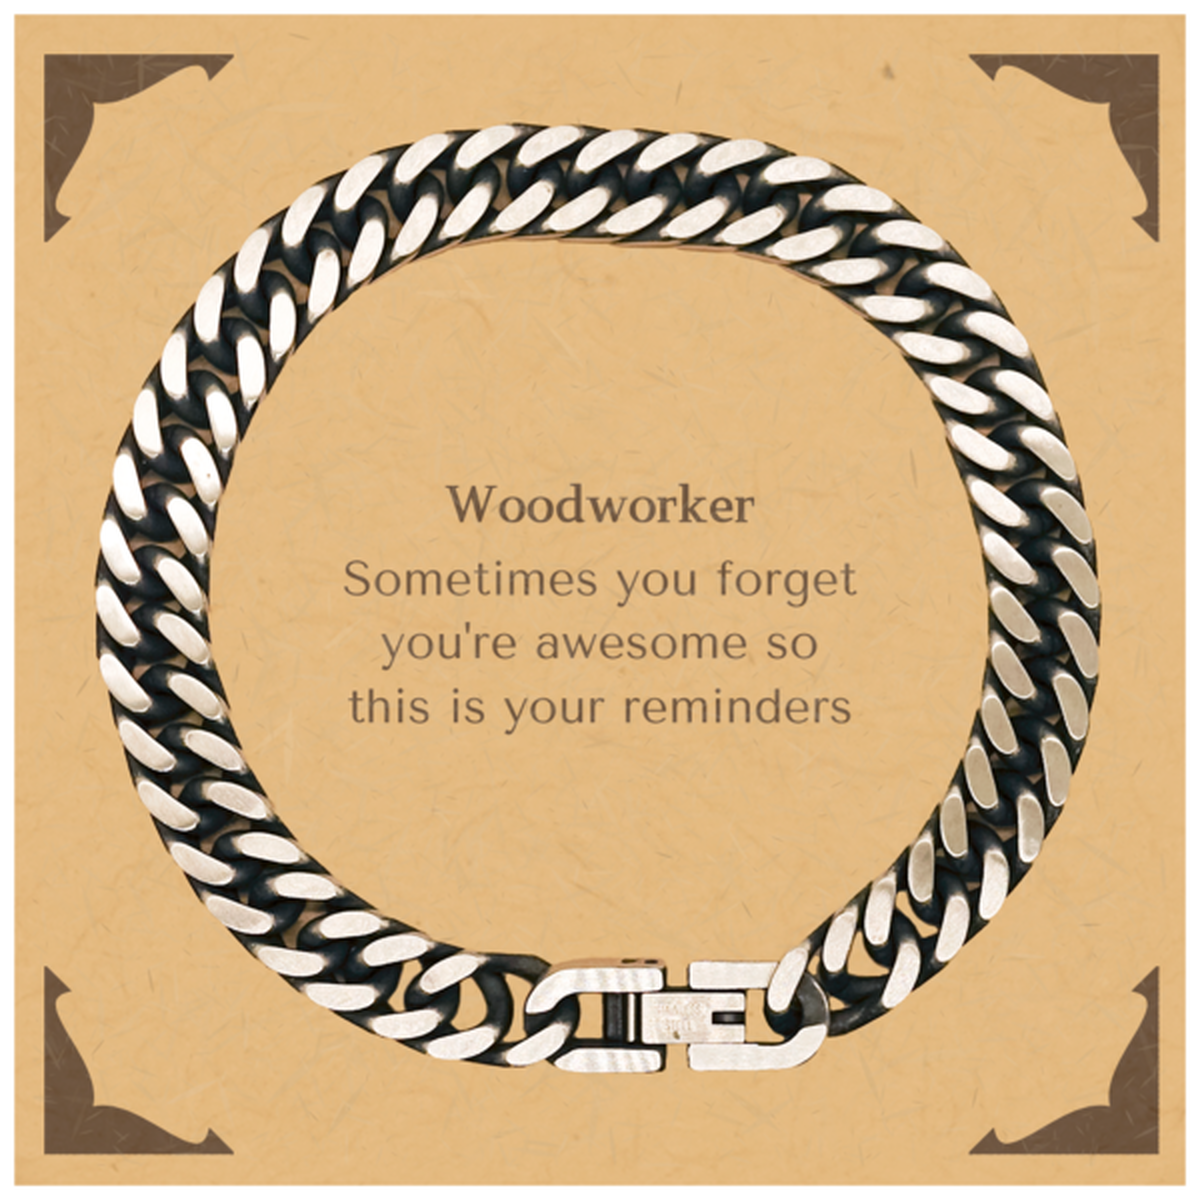 Sentimental Woodworker Cuban Link Chain Bracelet, Woodworker Sometimes you forget you're awesome so this is your reminders, Graduation Christmas Birthday Gifts for Woodworker, Men, Women, Coworkers